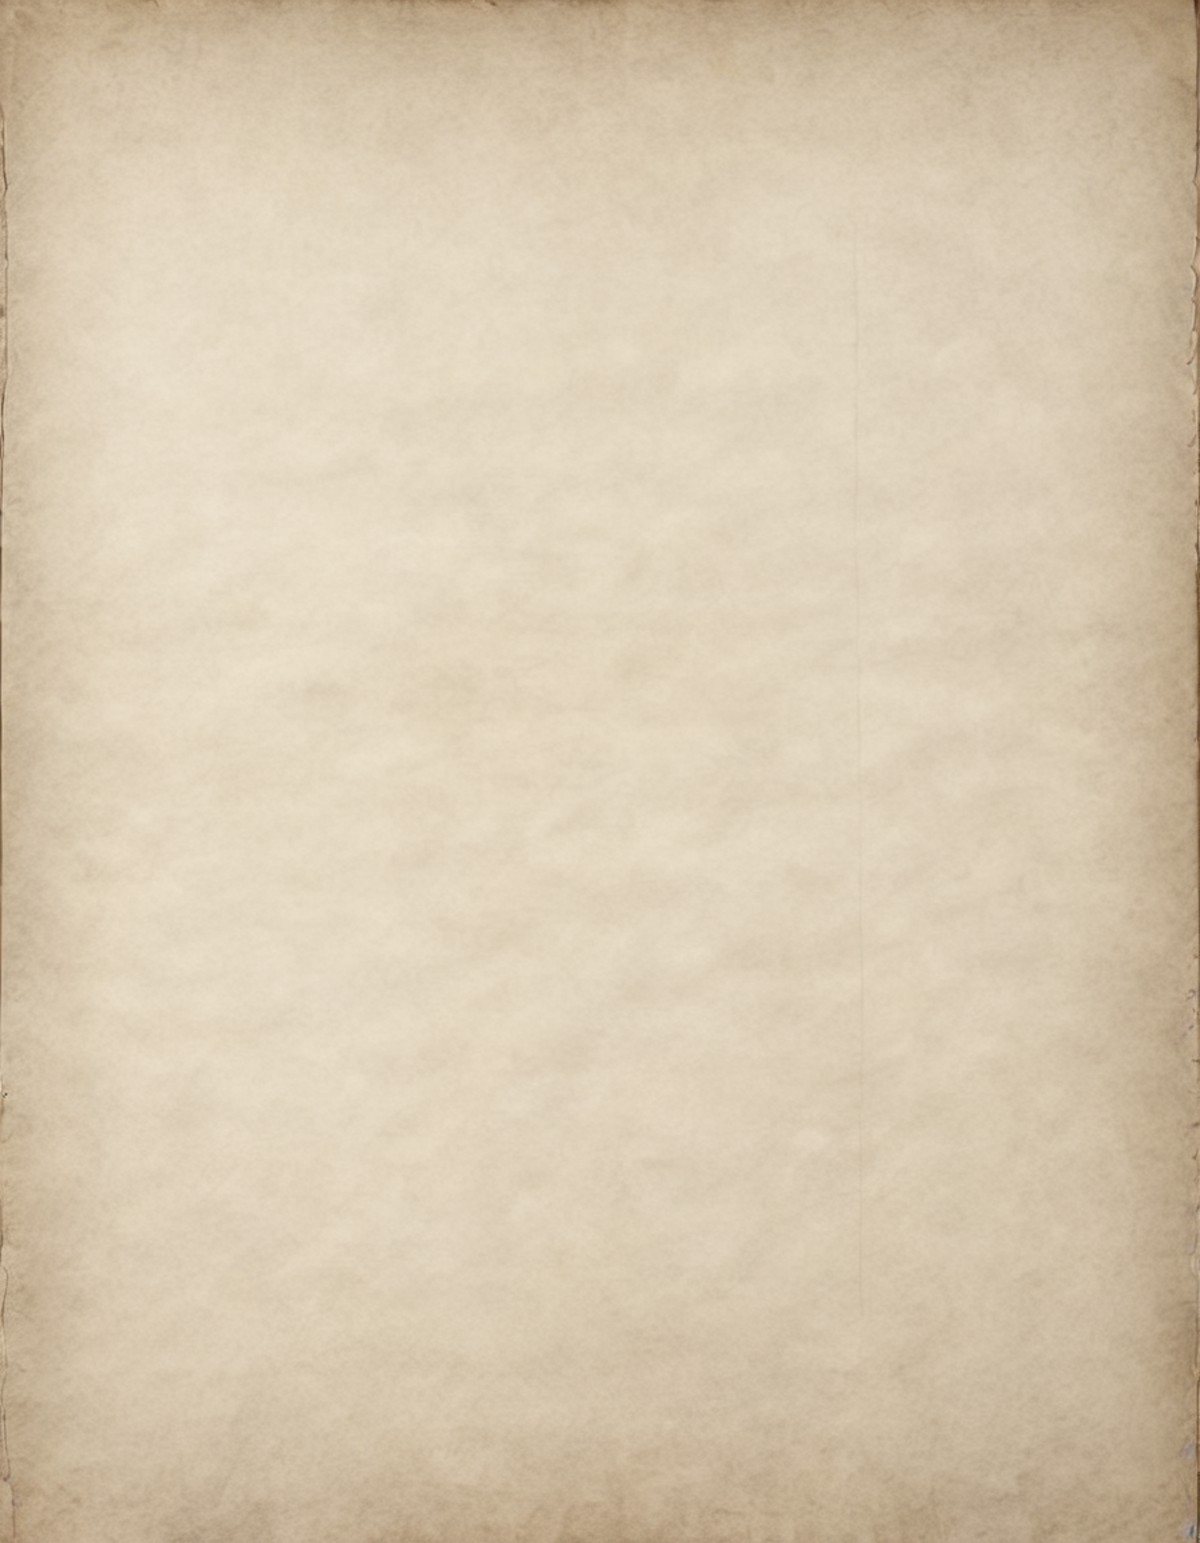 a blank sheet of pale parchment